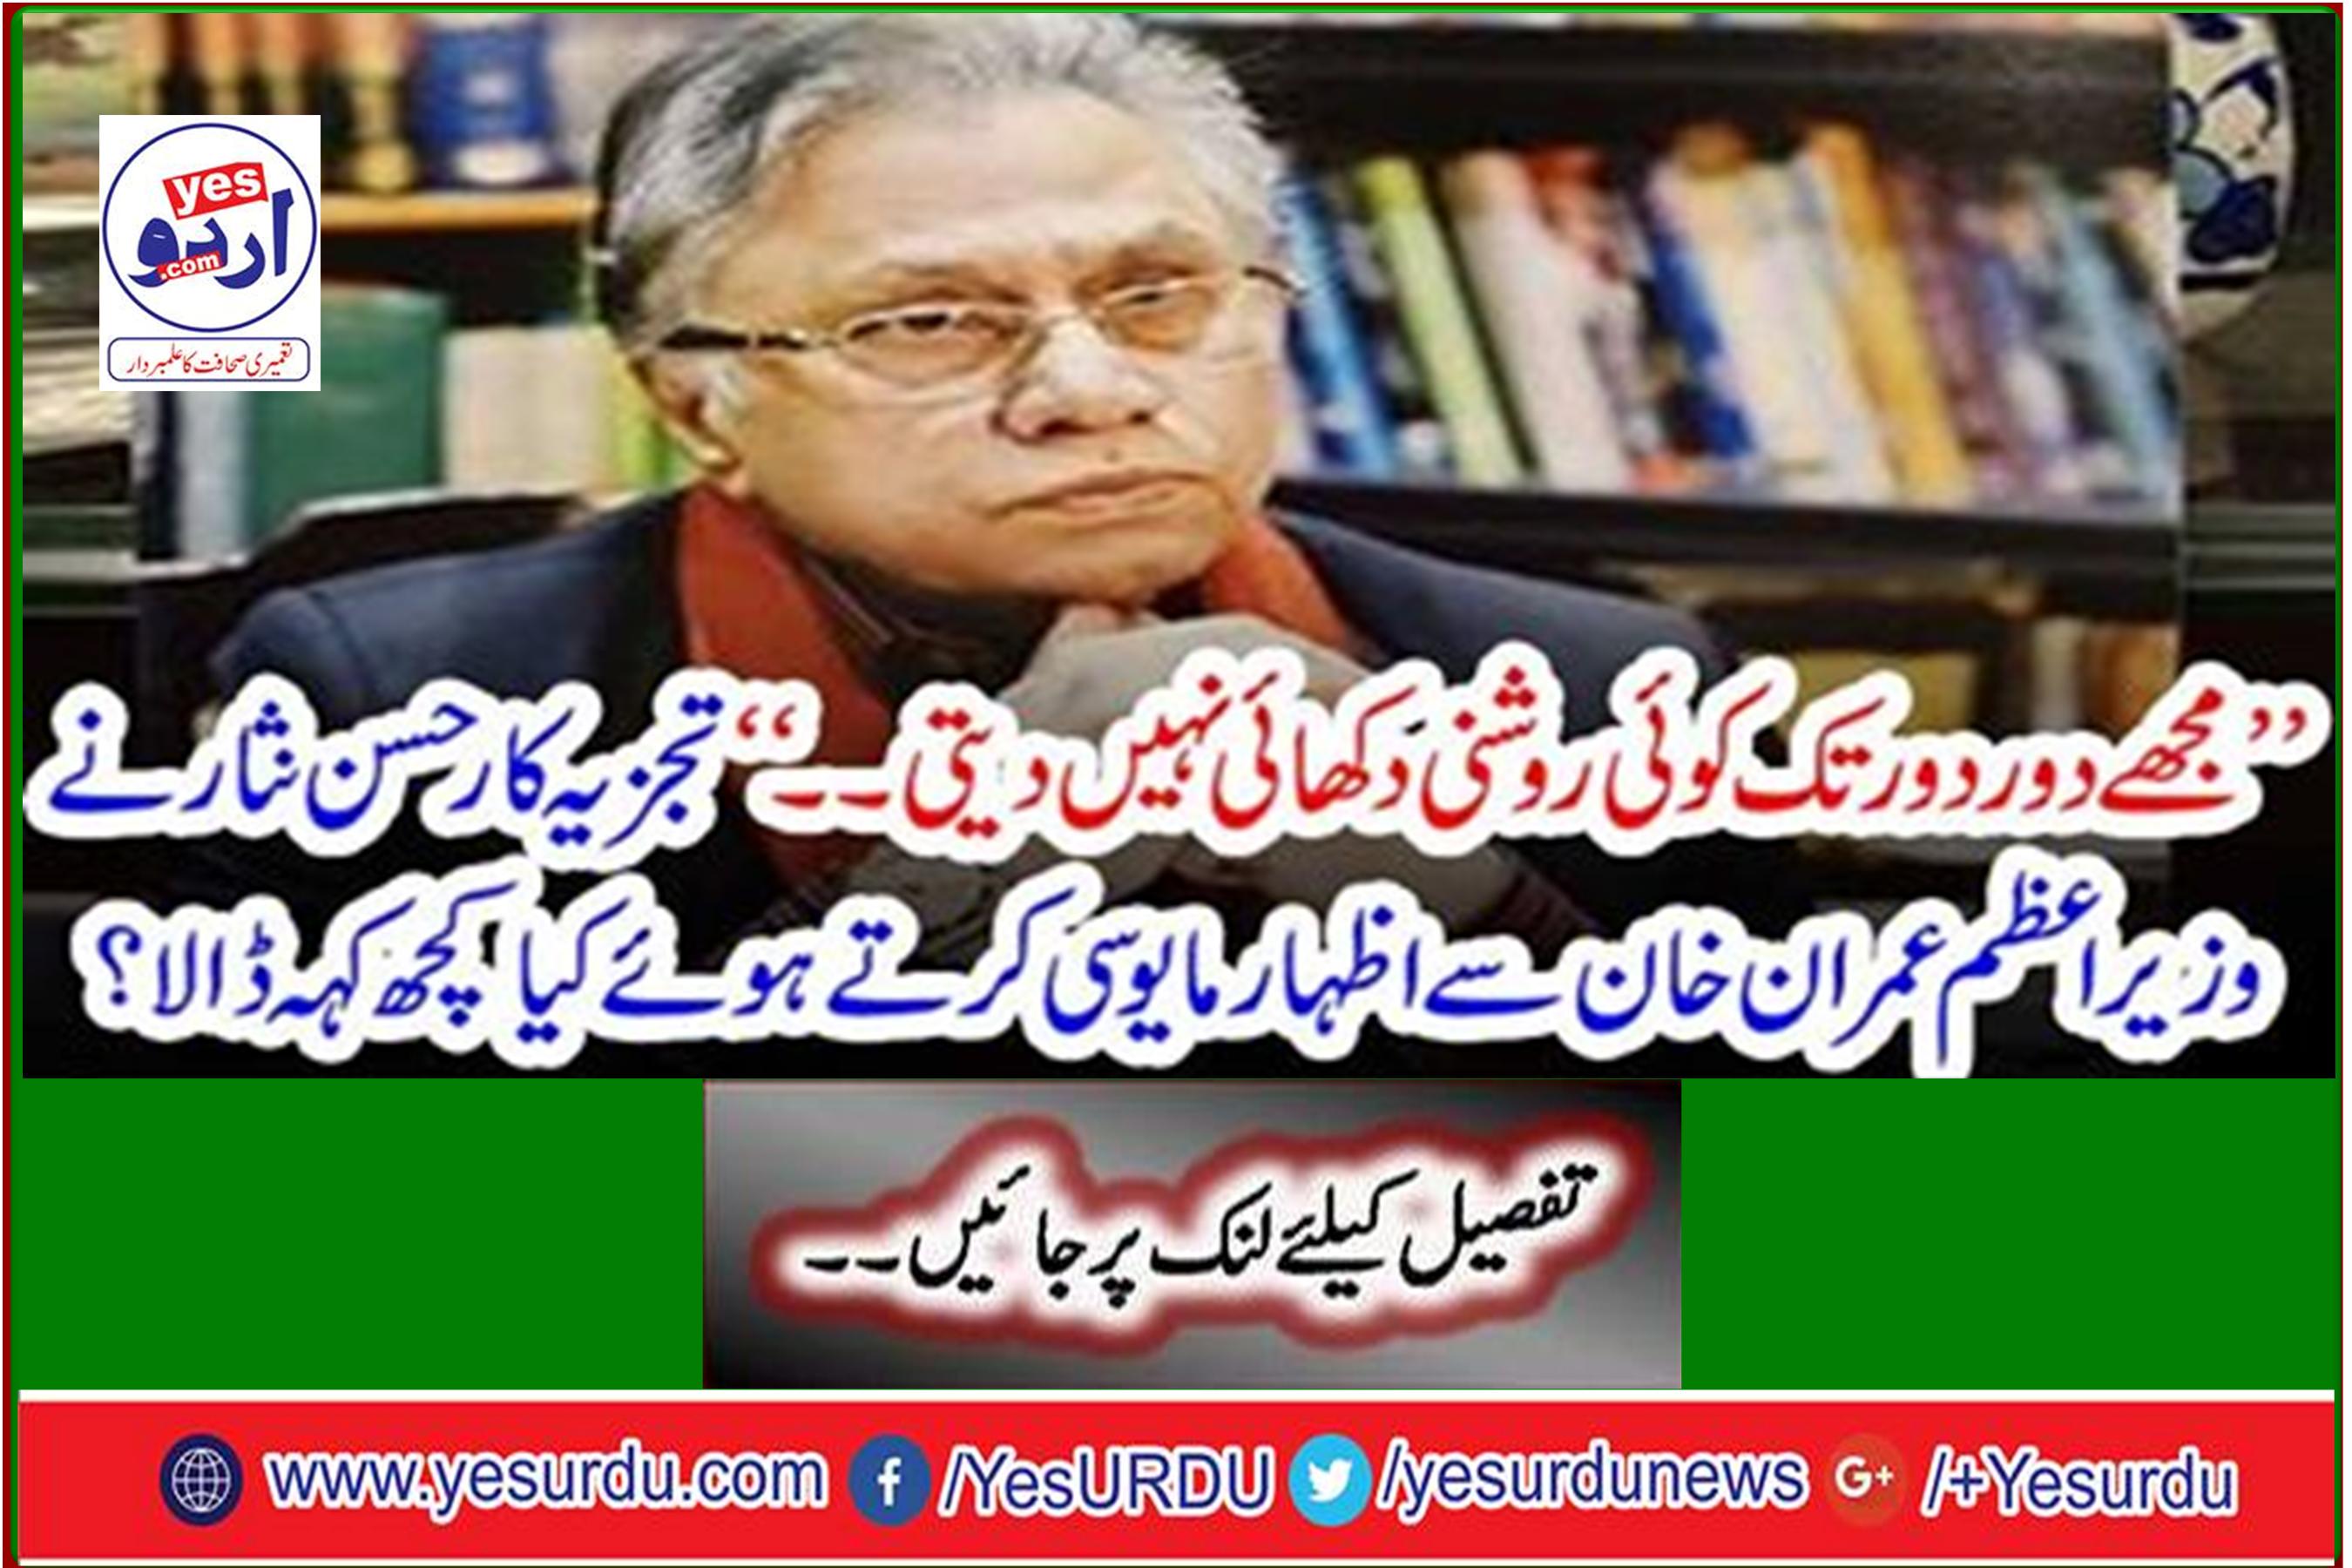 'Analyst Hassan Nisar said something in frustration with Prime Minister Imran Khan?